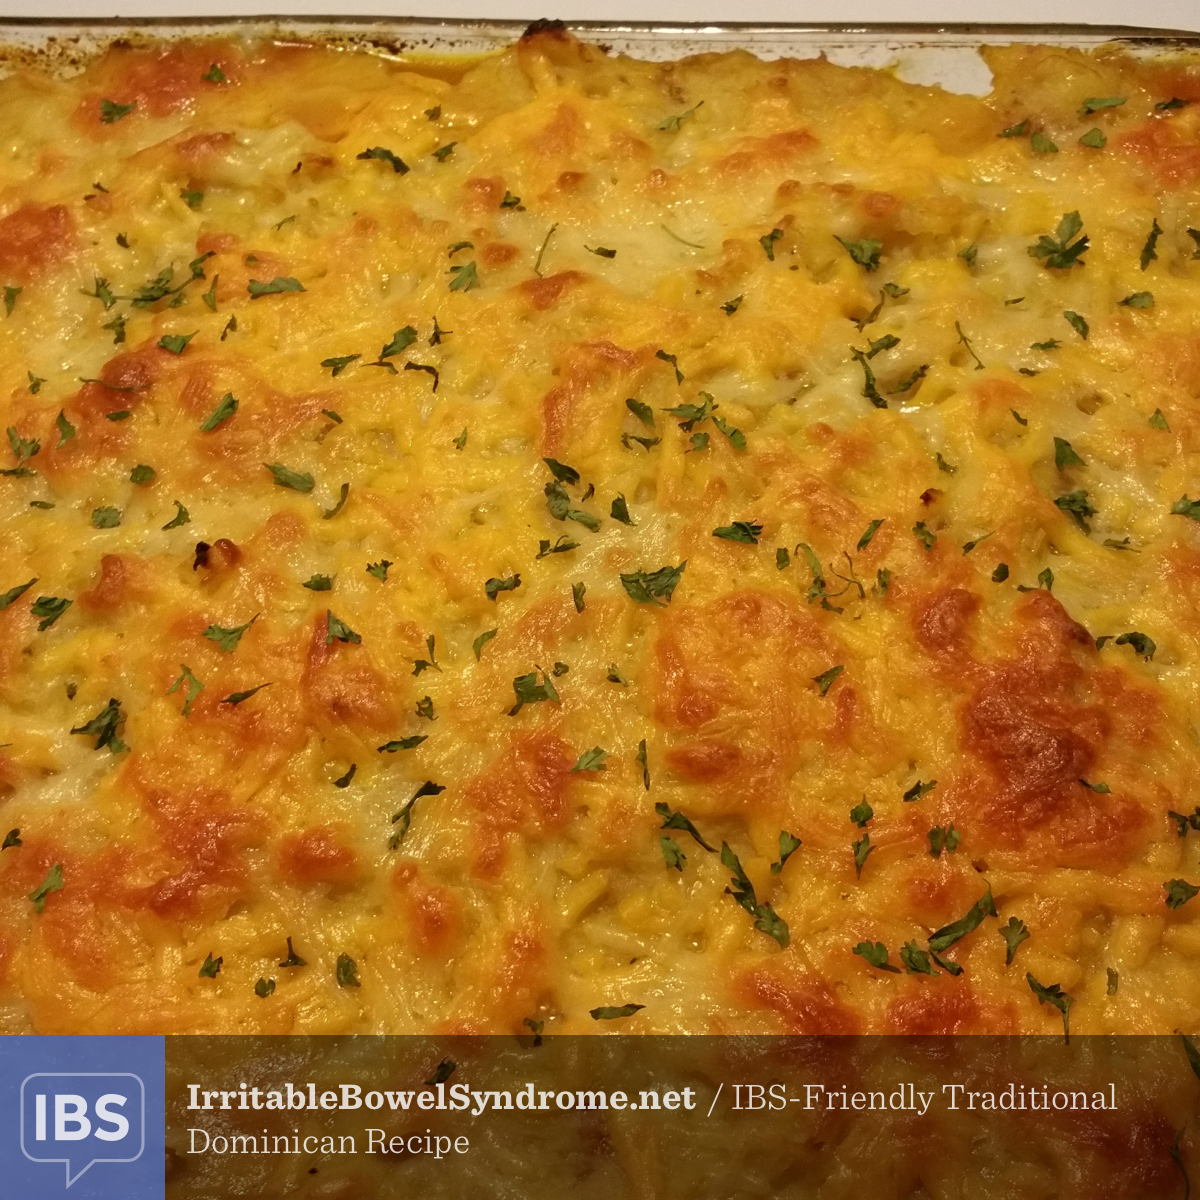 IBS-Friendly Traditional Dominican Recipe